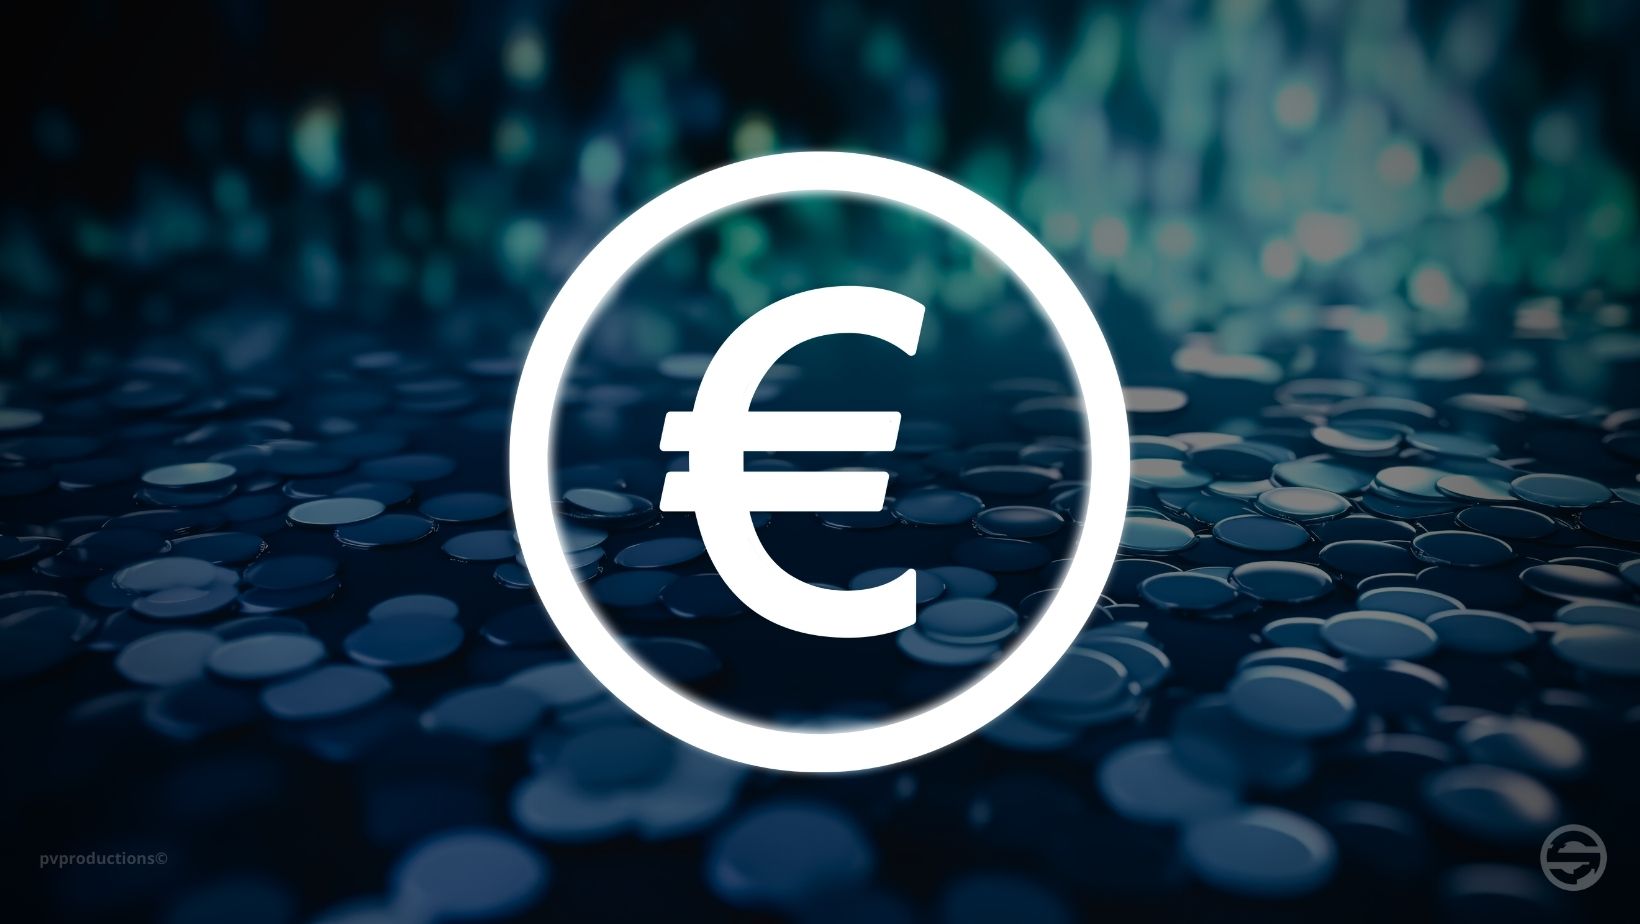 Digital euro will take off under the guidance of the ECB in November 2023